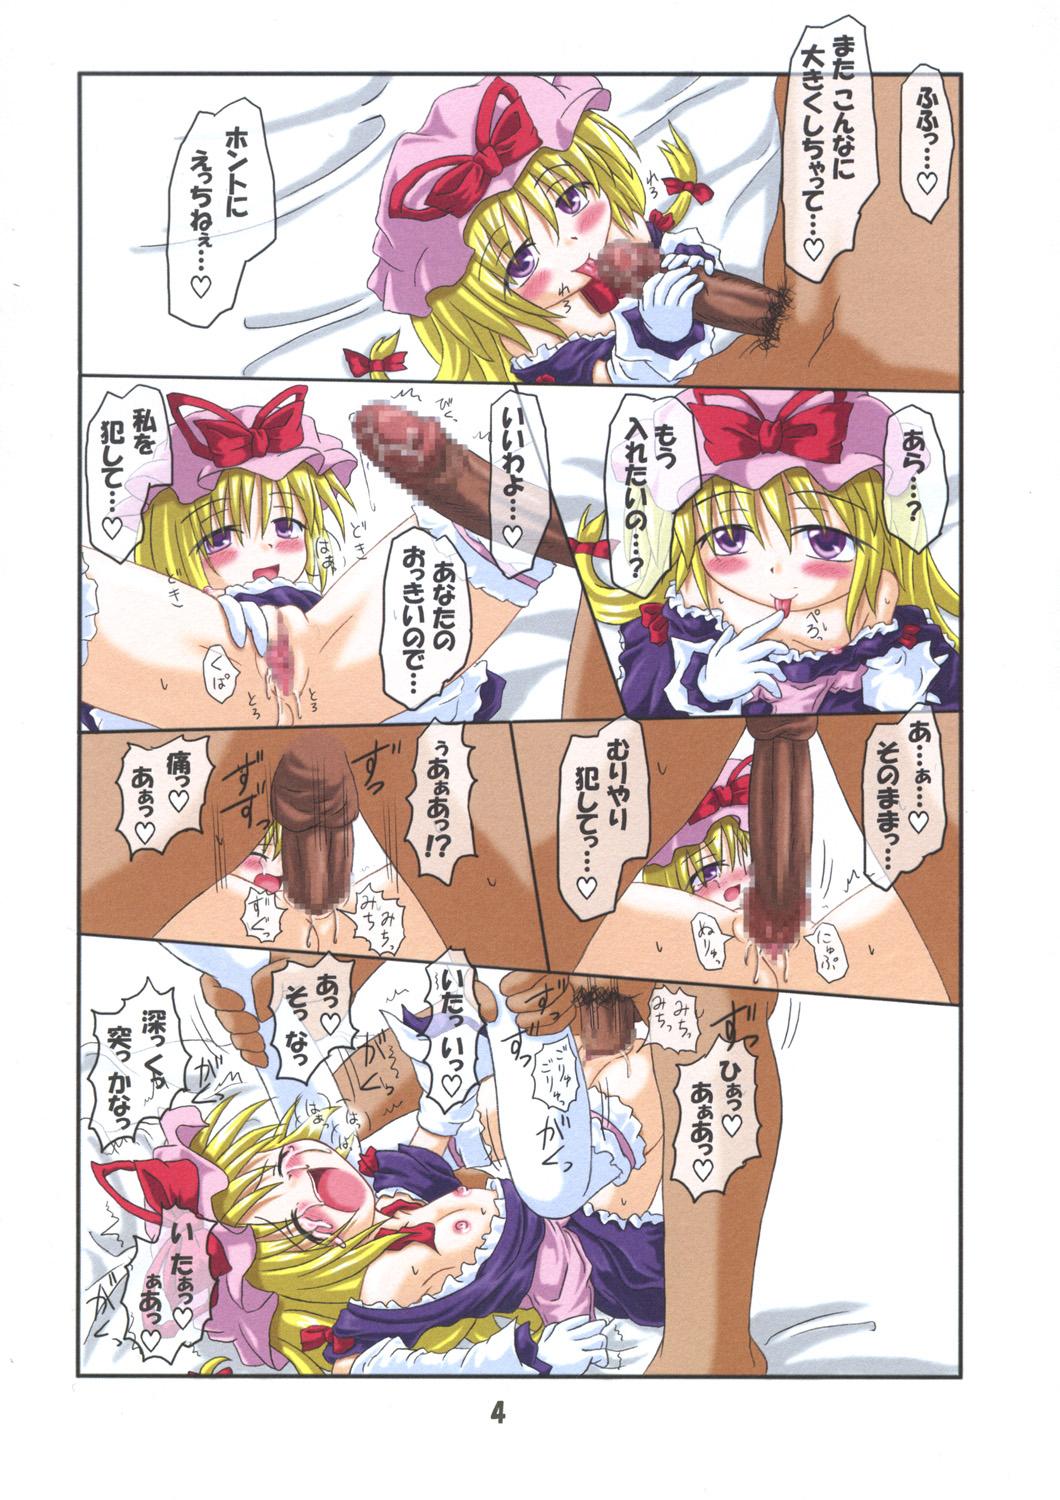 Spain Rollin 17 - Touhou project Real Amature Porn - Page 3